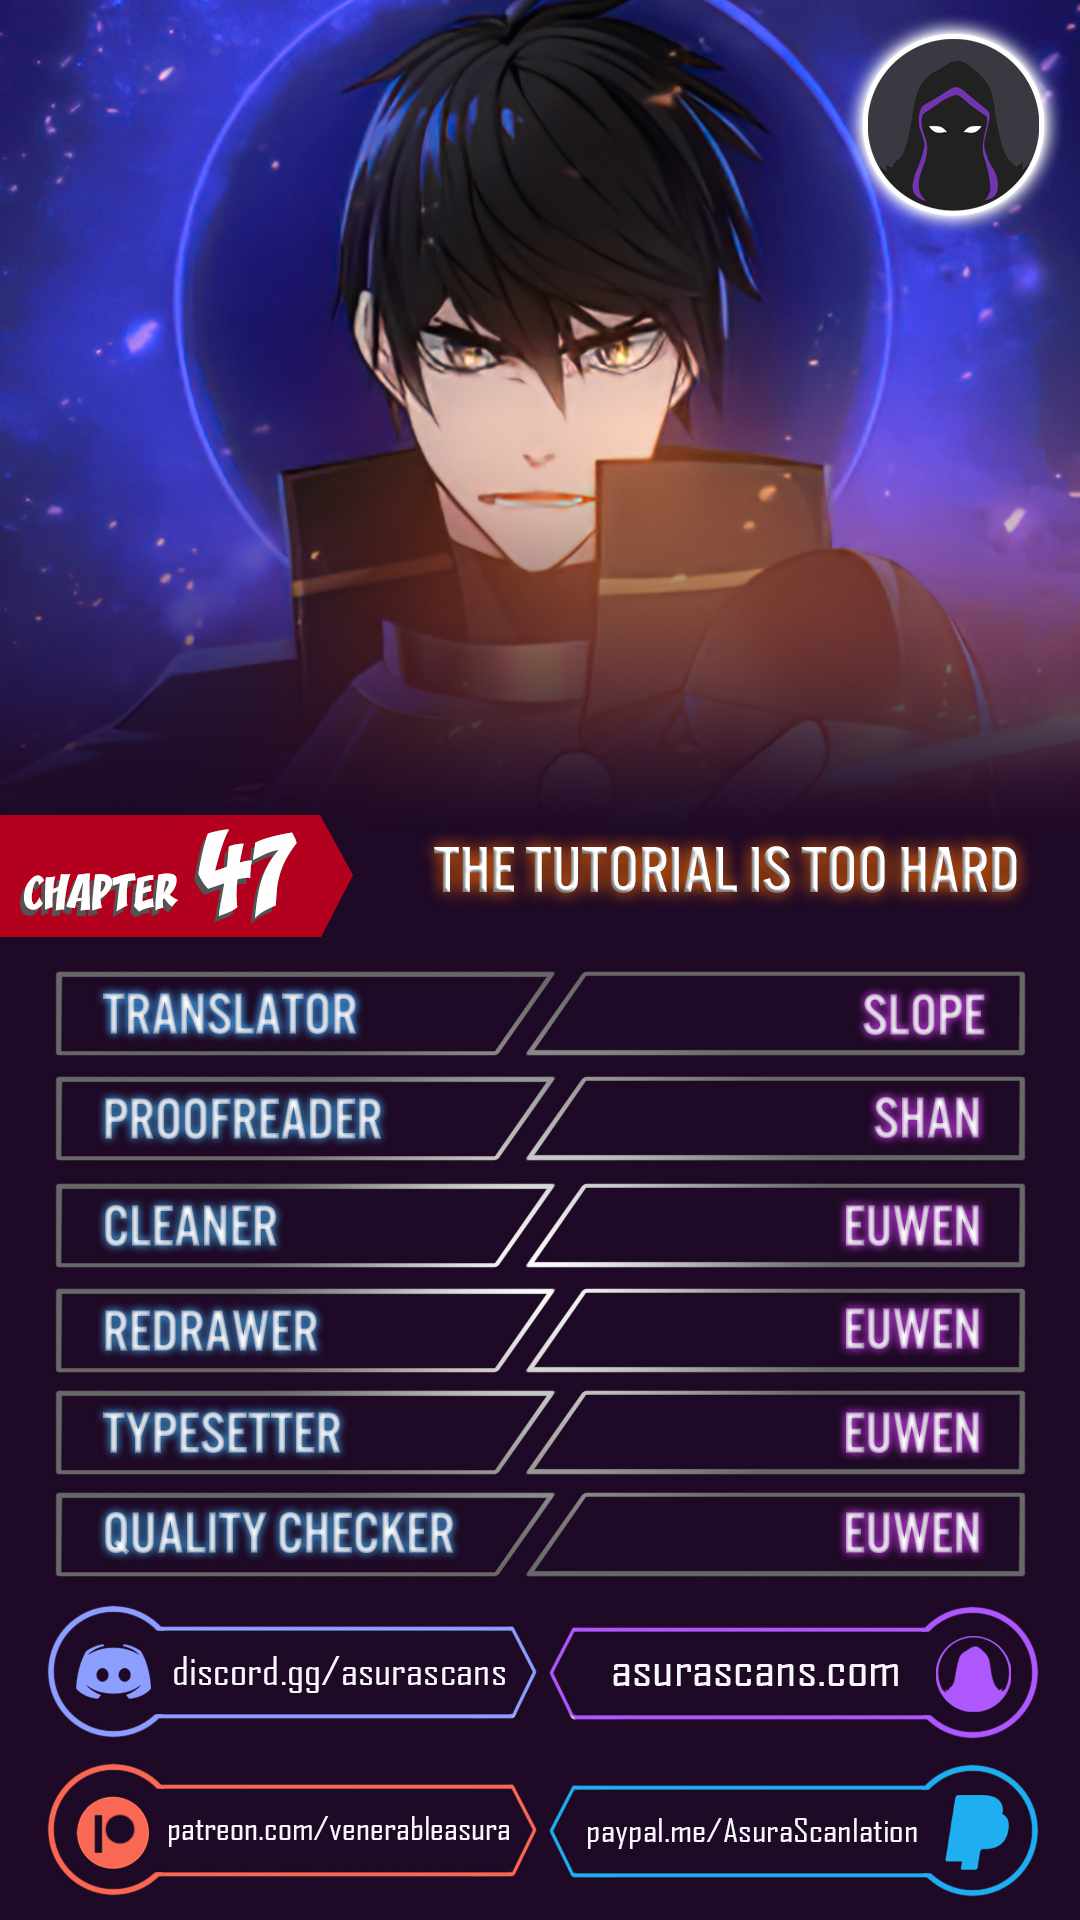 The Tutorial is Too Hard chapter 47